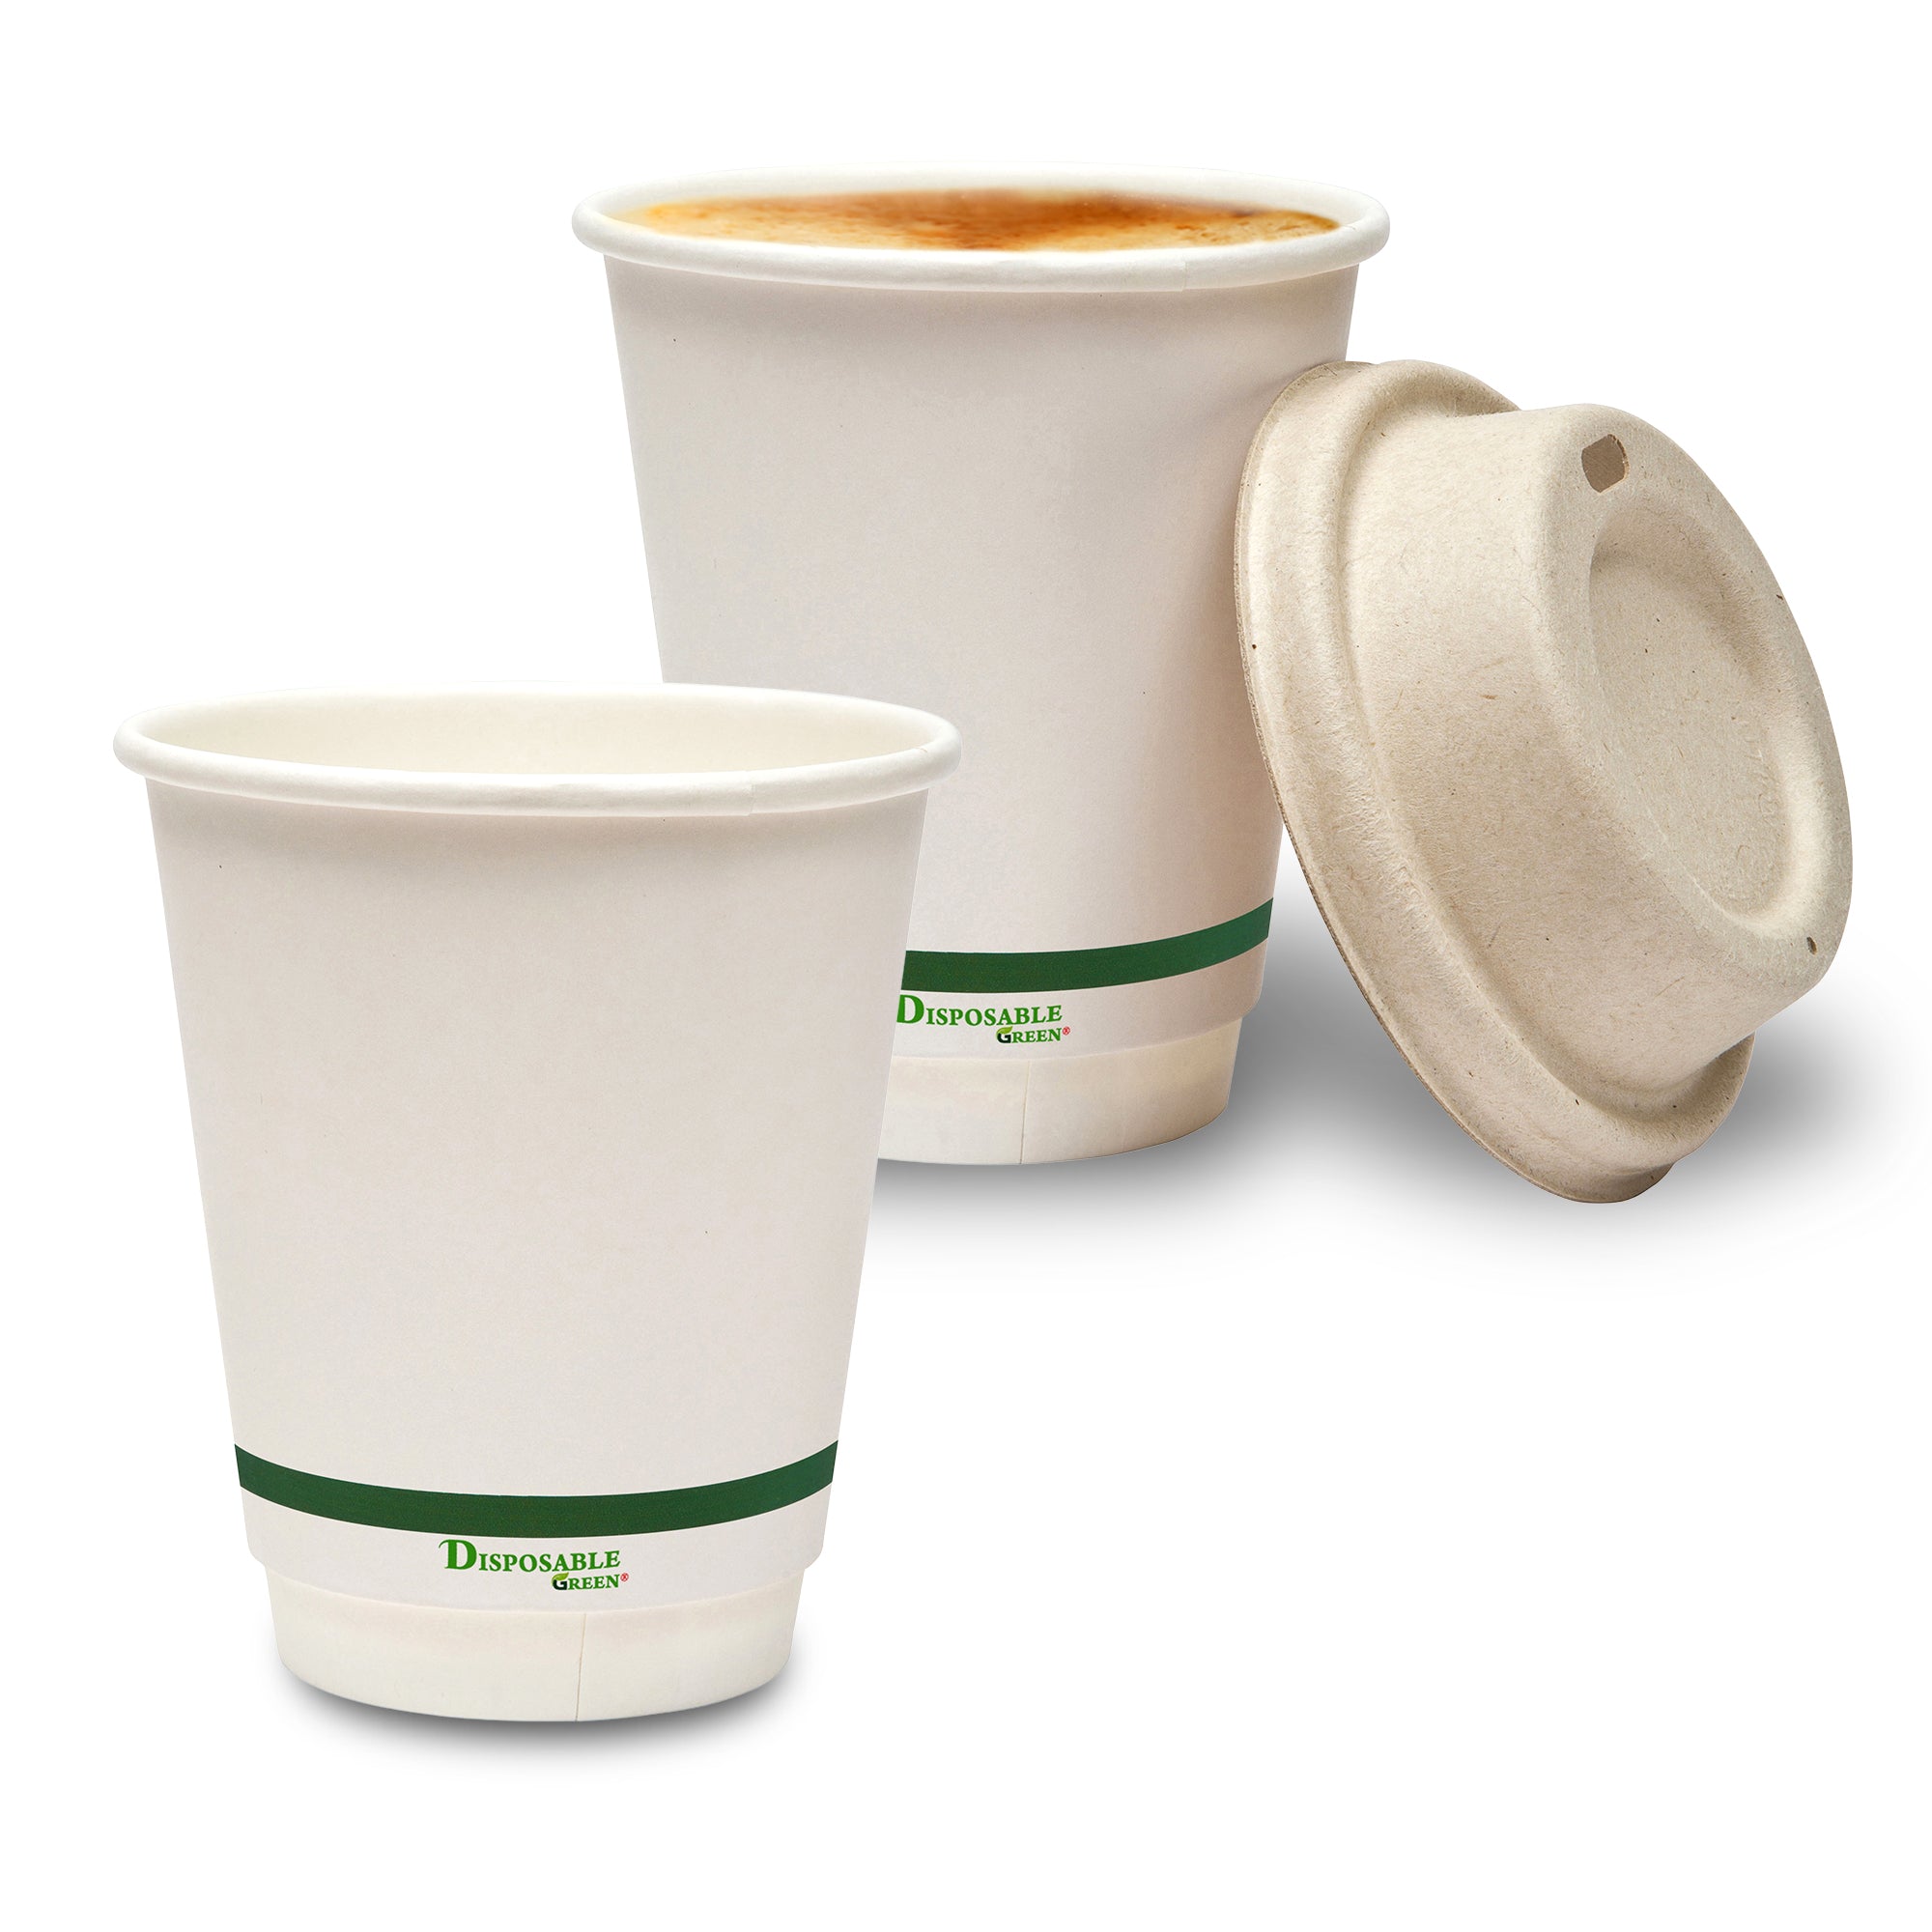 8oz (227ml) NEXTGEN Certified<br>Home Compostable Double Wall Coffee Cups